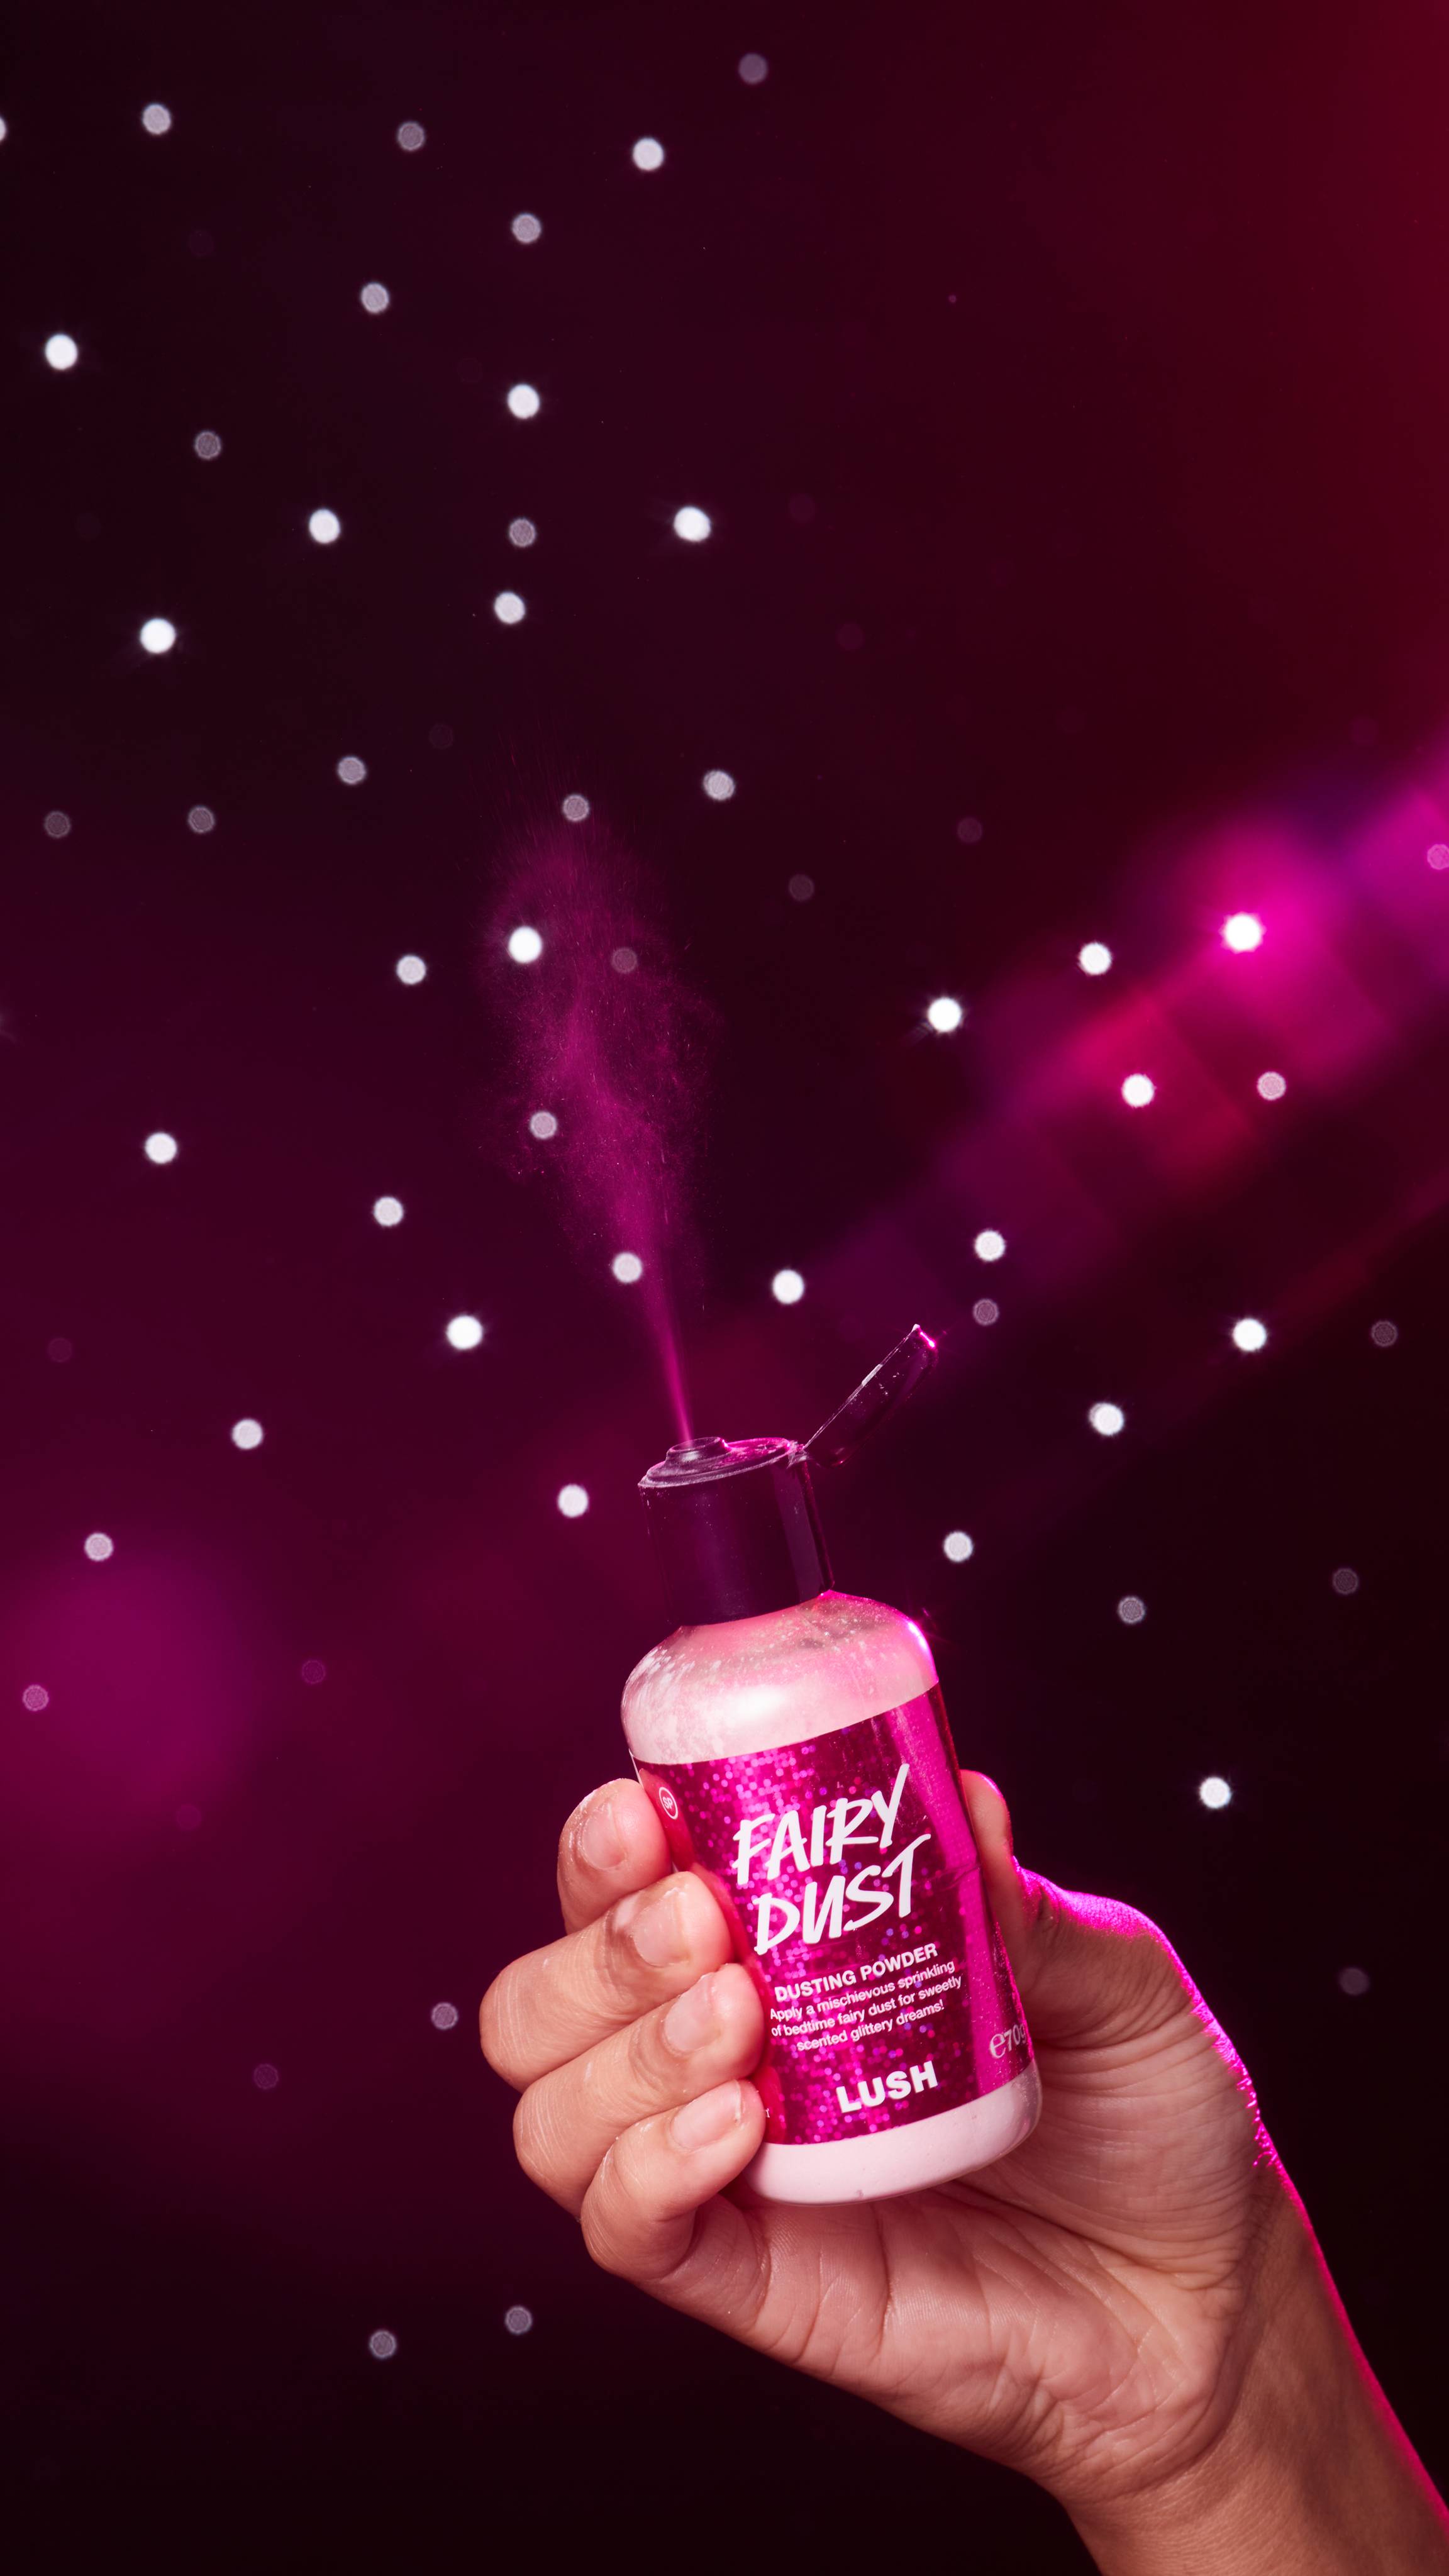 Image shows a close-up of the model's hand holding the Fairy Dust bottle as they squeeze some of the shimmering dust out. 